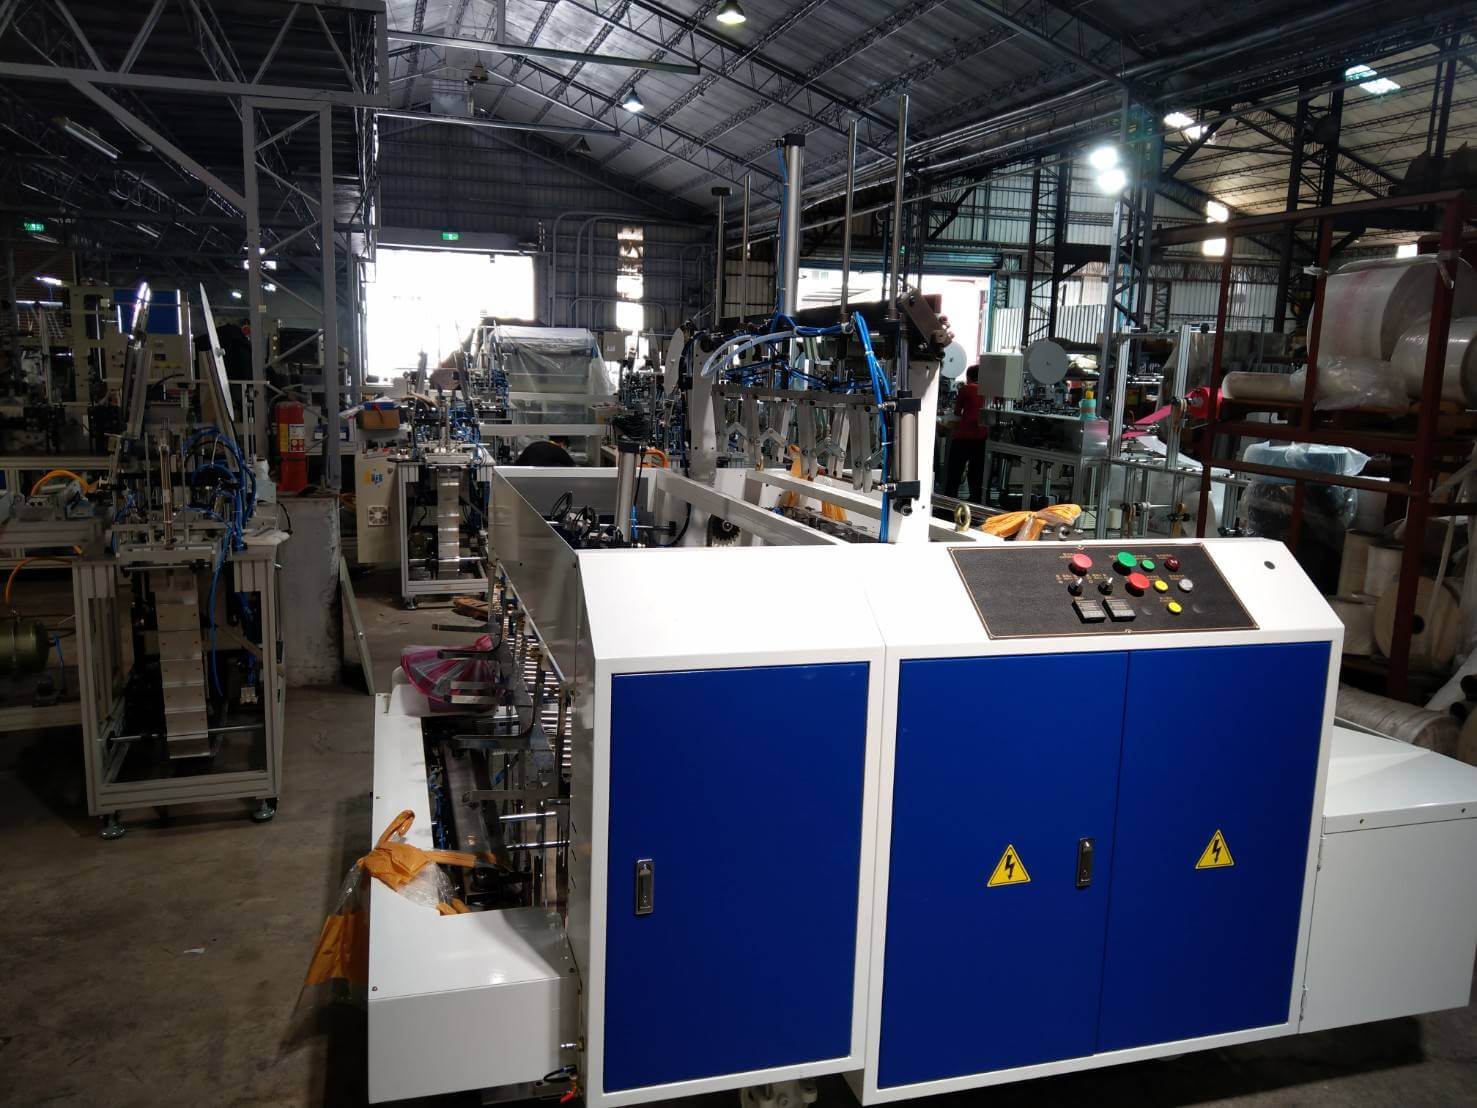 The plastic bag production process continues to be fully automated